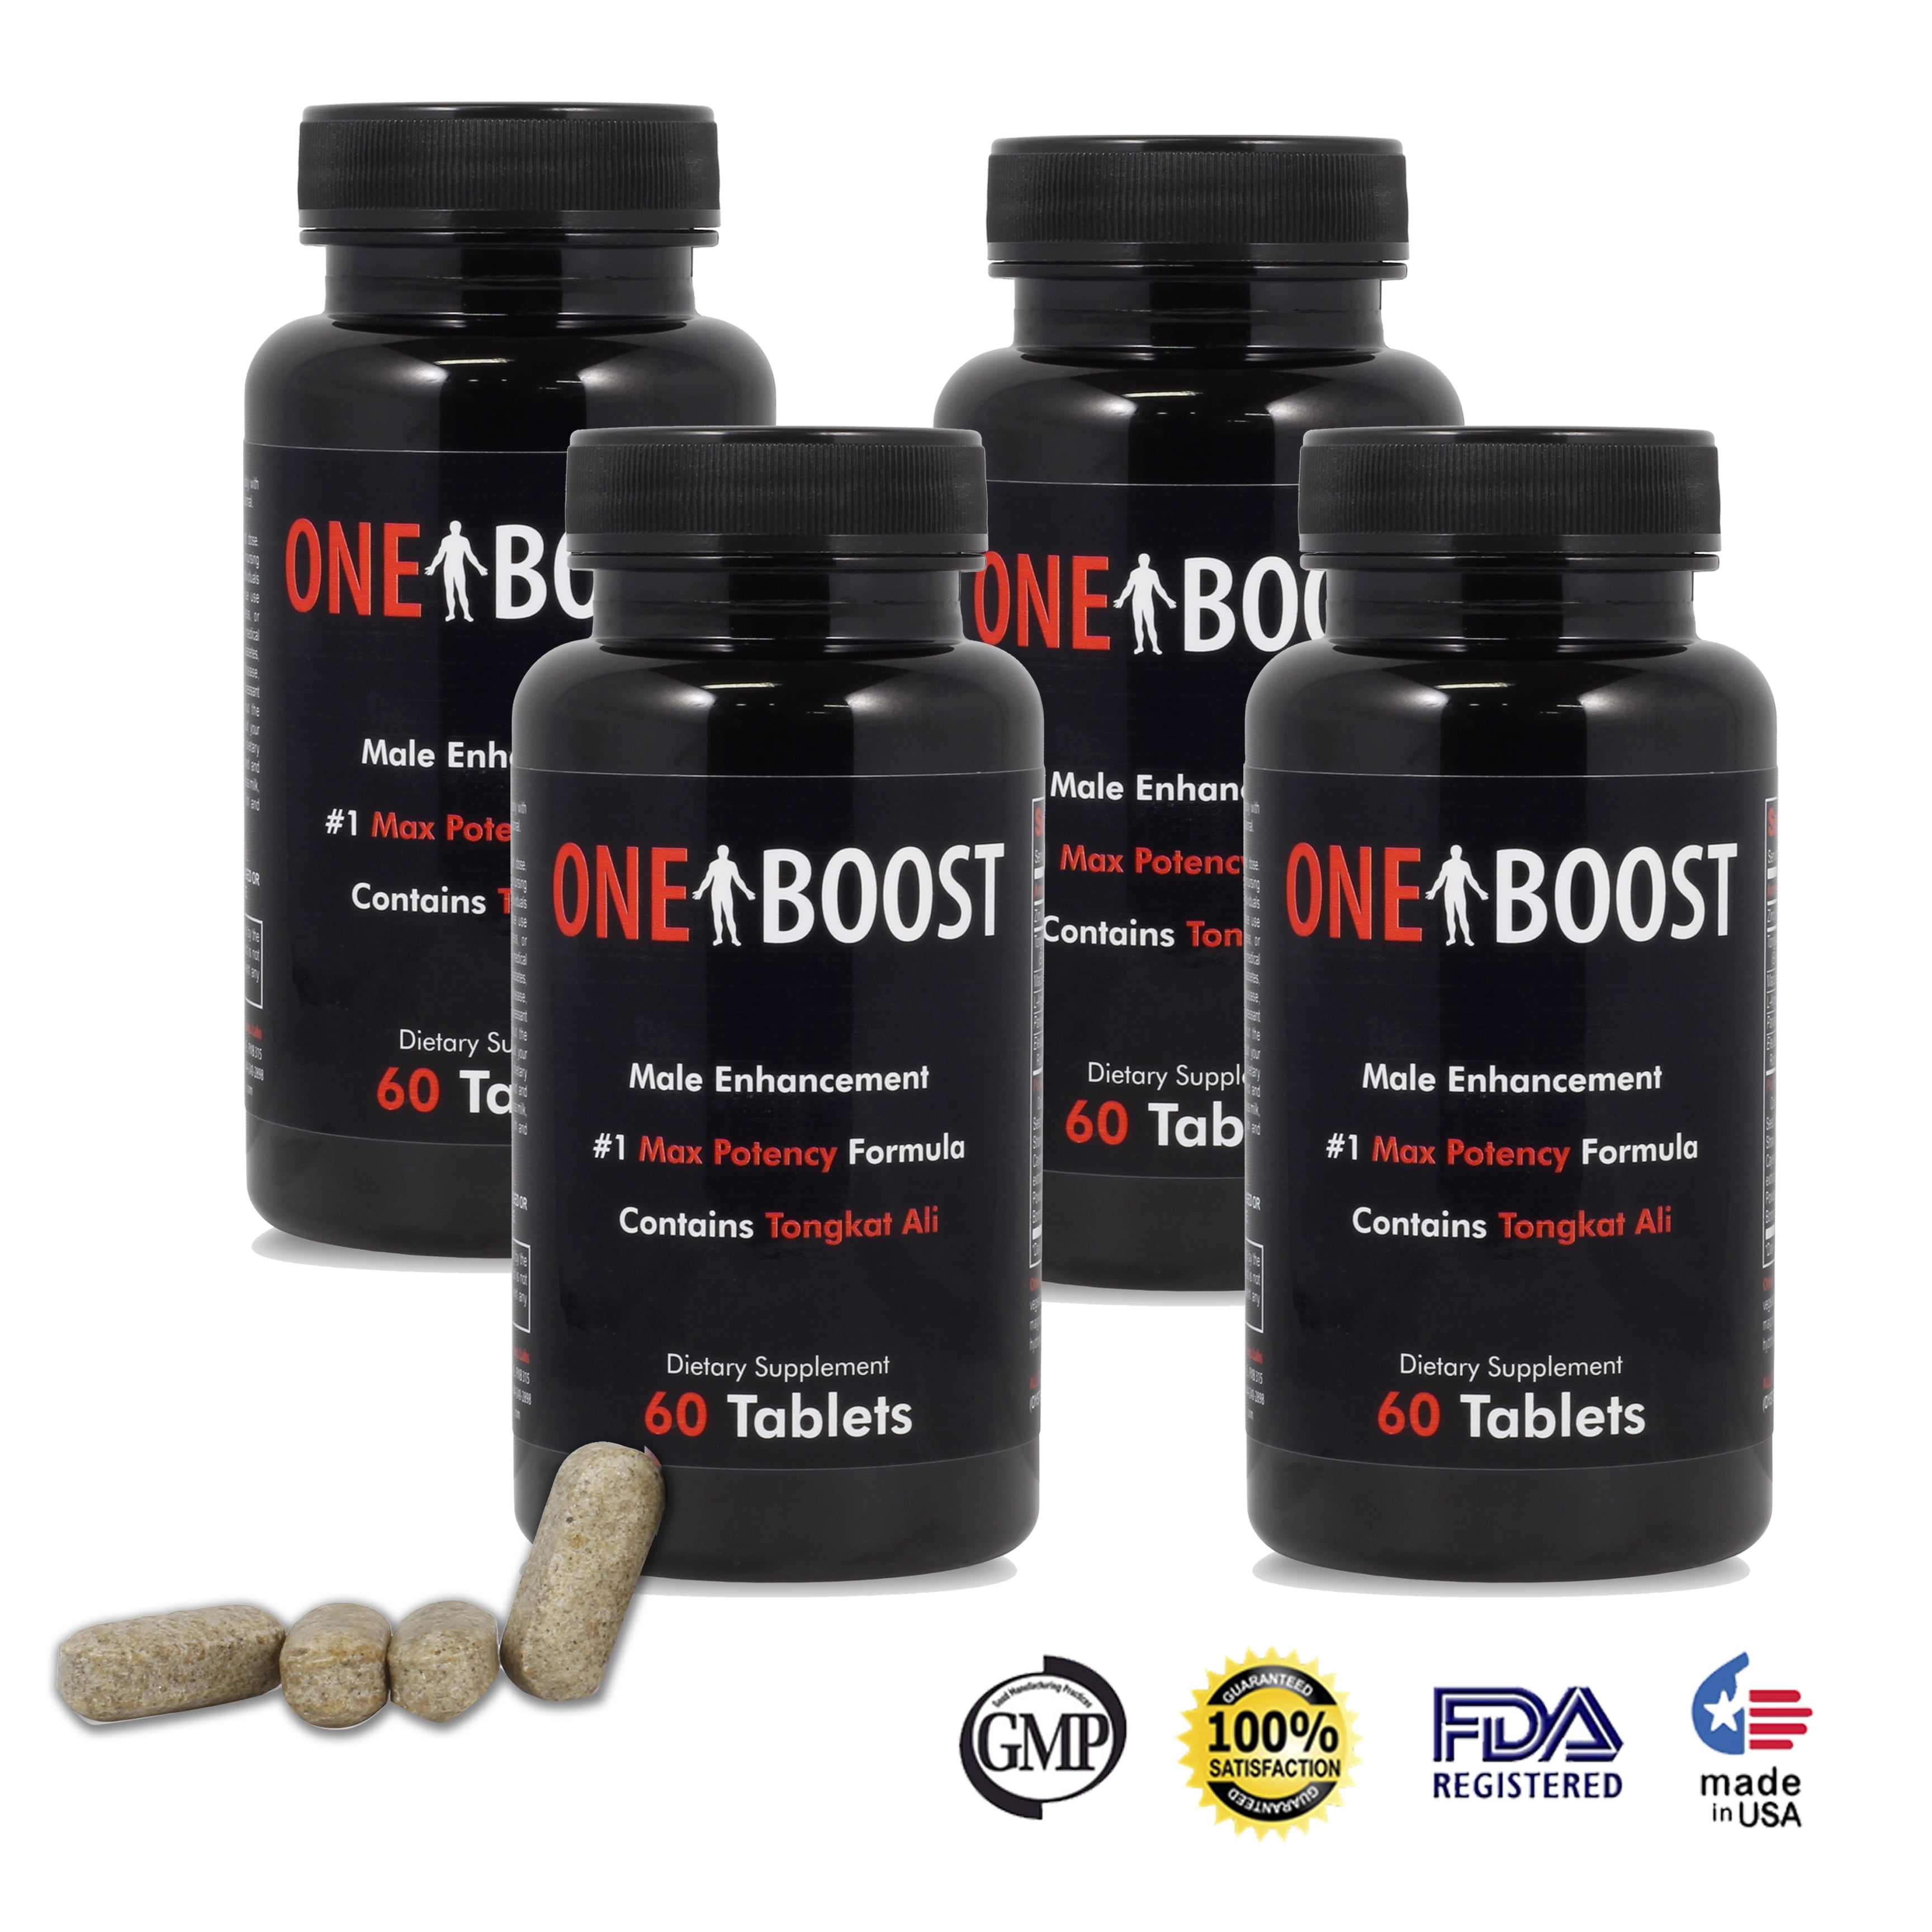 One Boost Testosterone Booster For Men And Women Libido Energy And Overall Well Being 240 Ct 